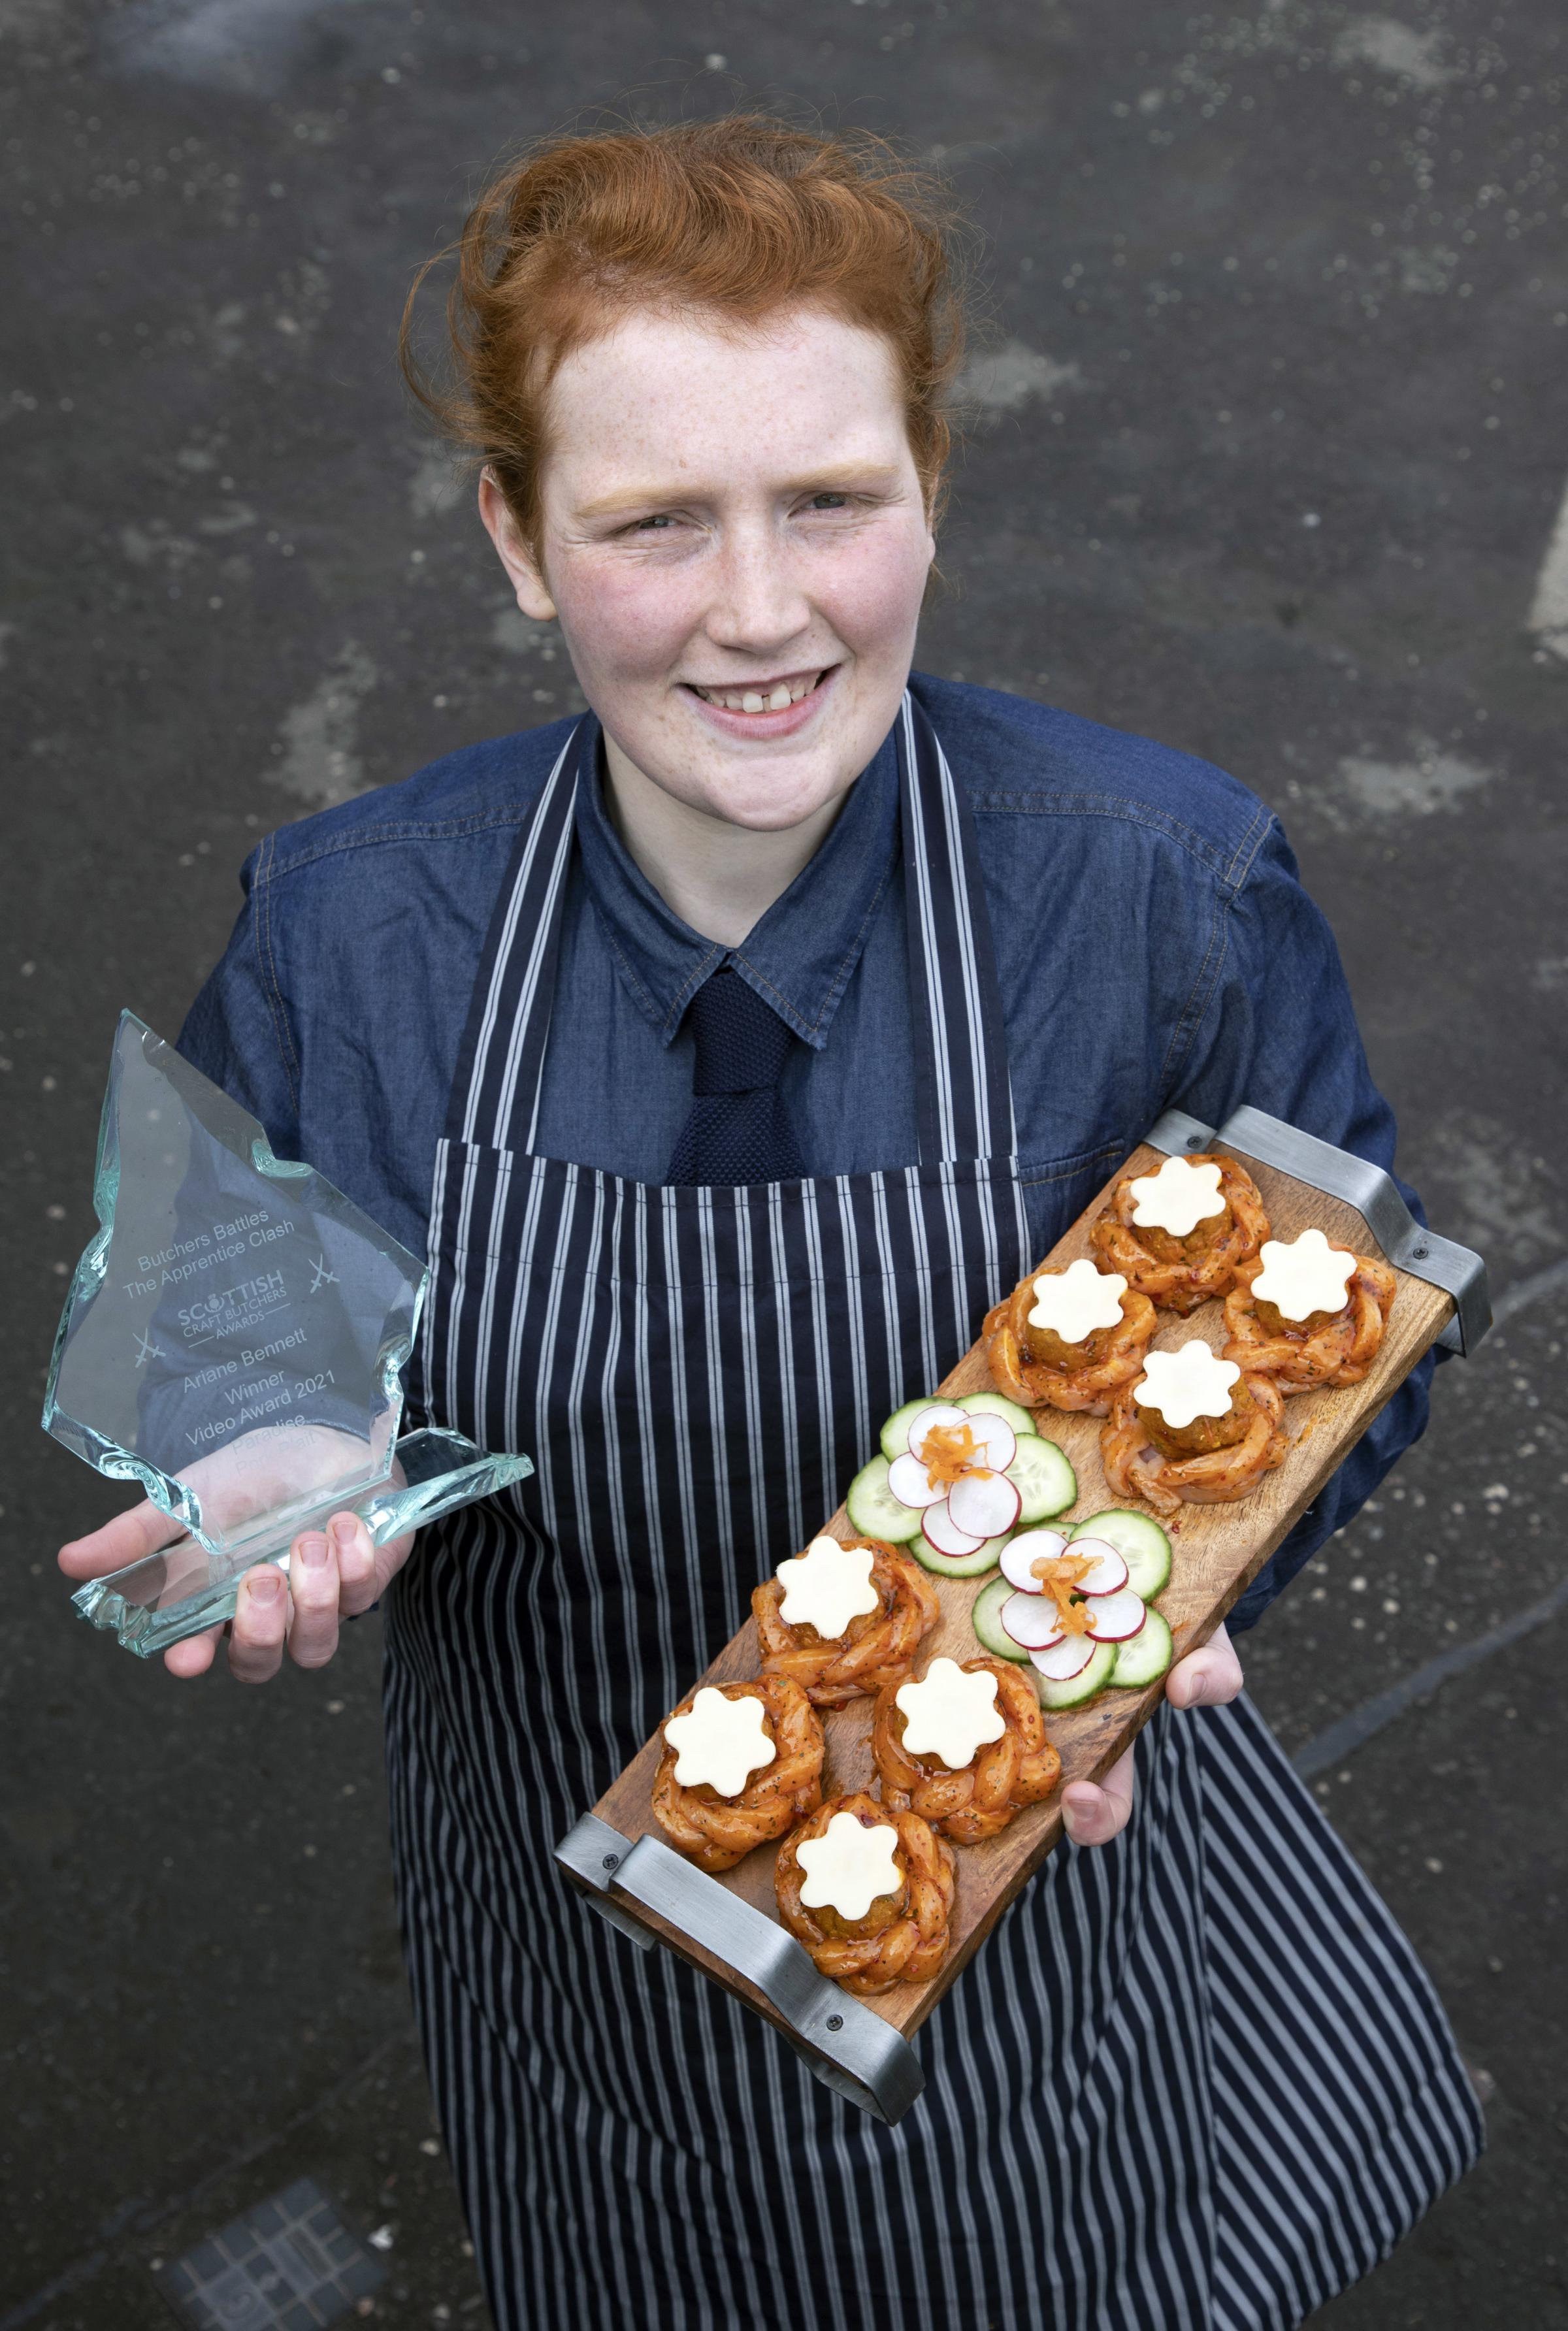 Ariane Bennett winner of the video award 2021 with her Paradise Pork Plait Picture by Graeme Hart